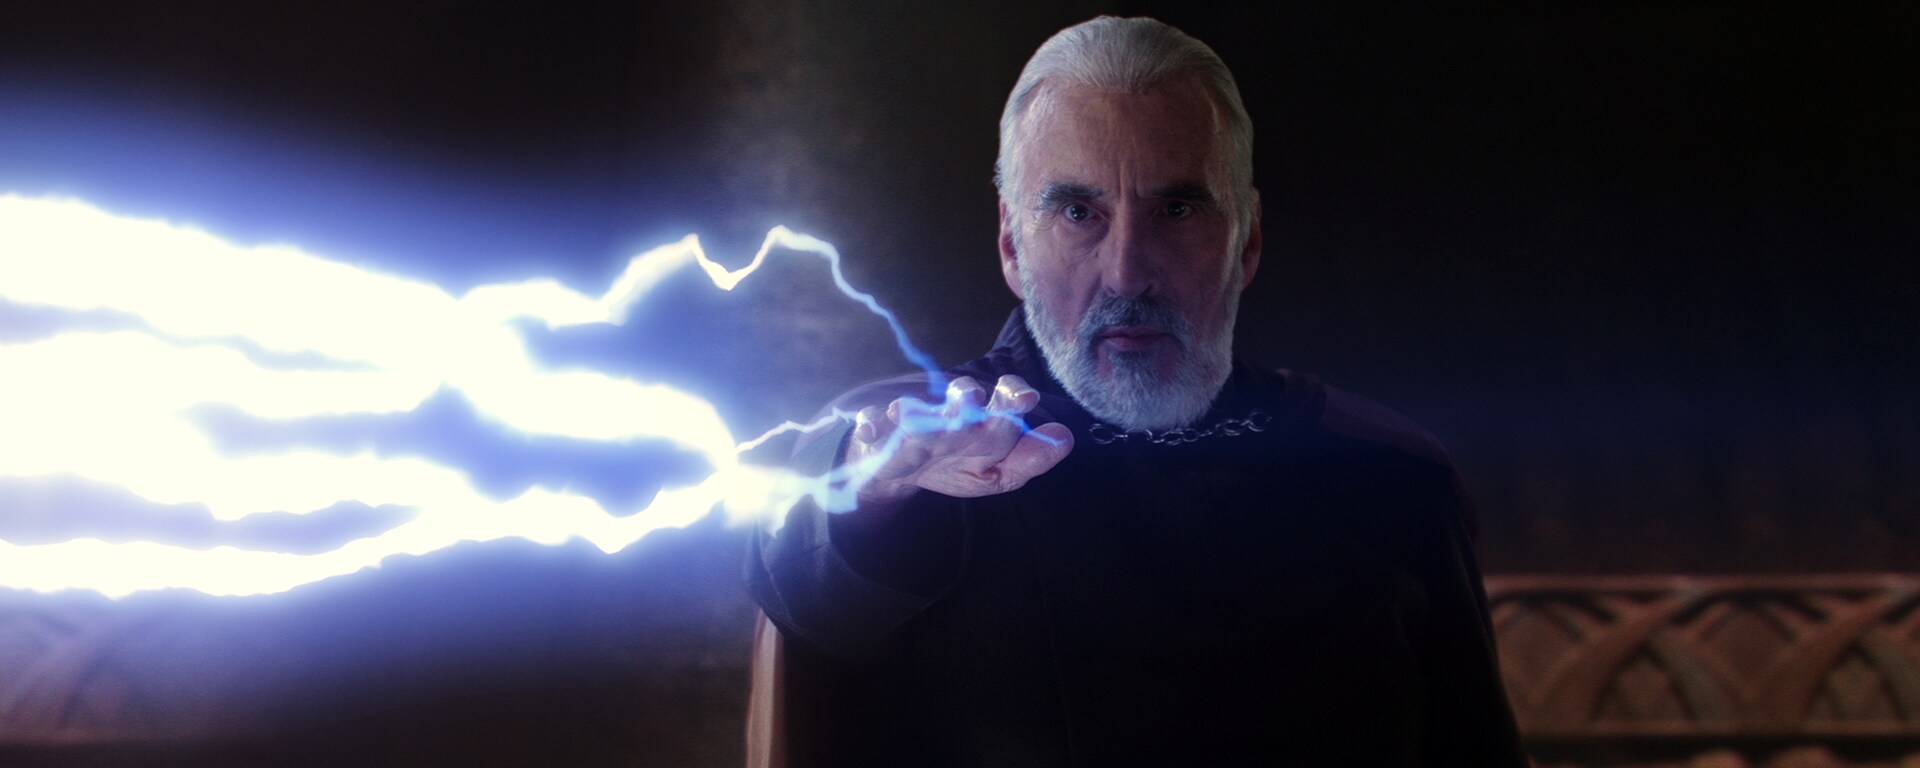 Count Dooku unleashes Force lightning.